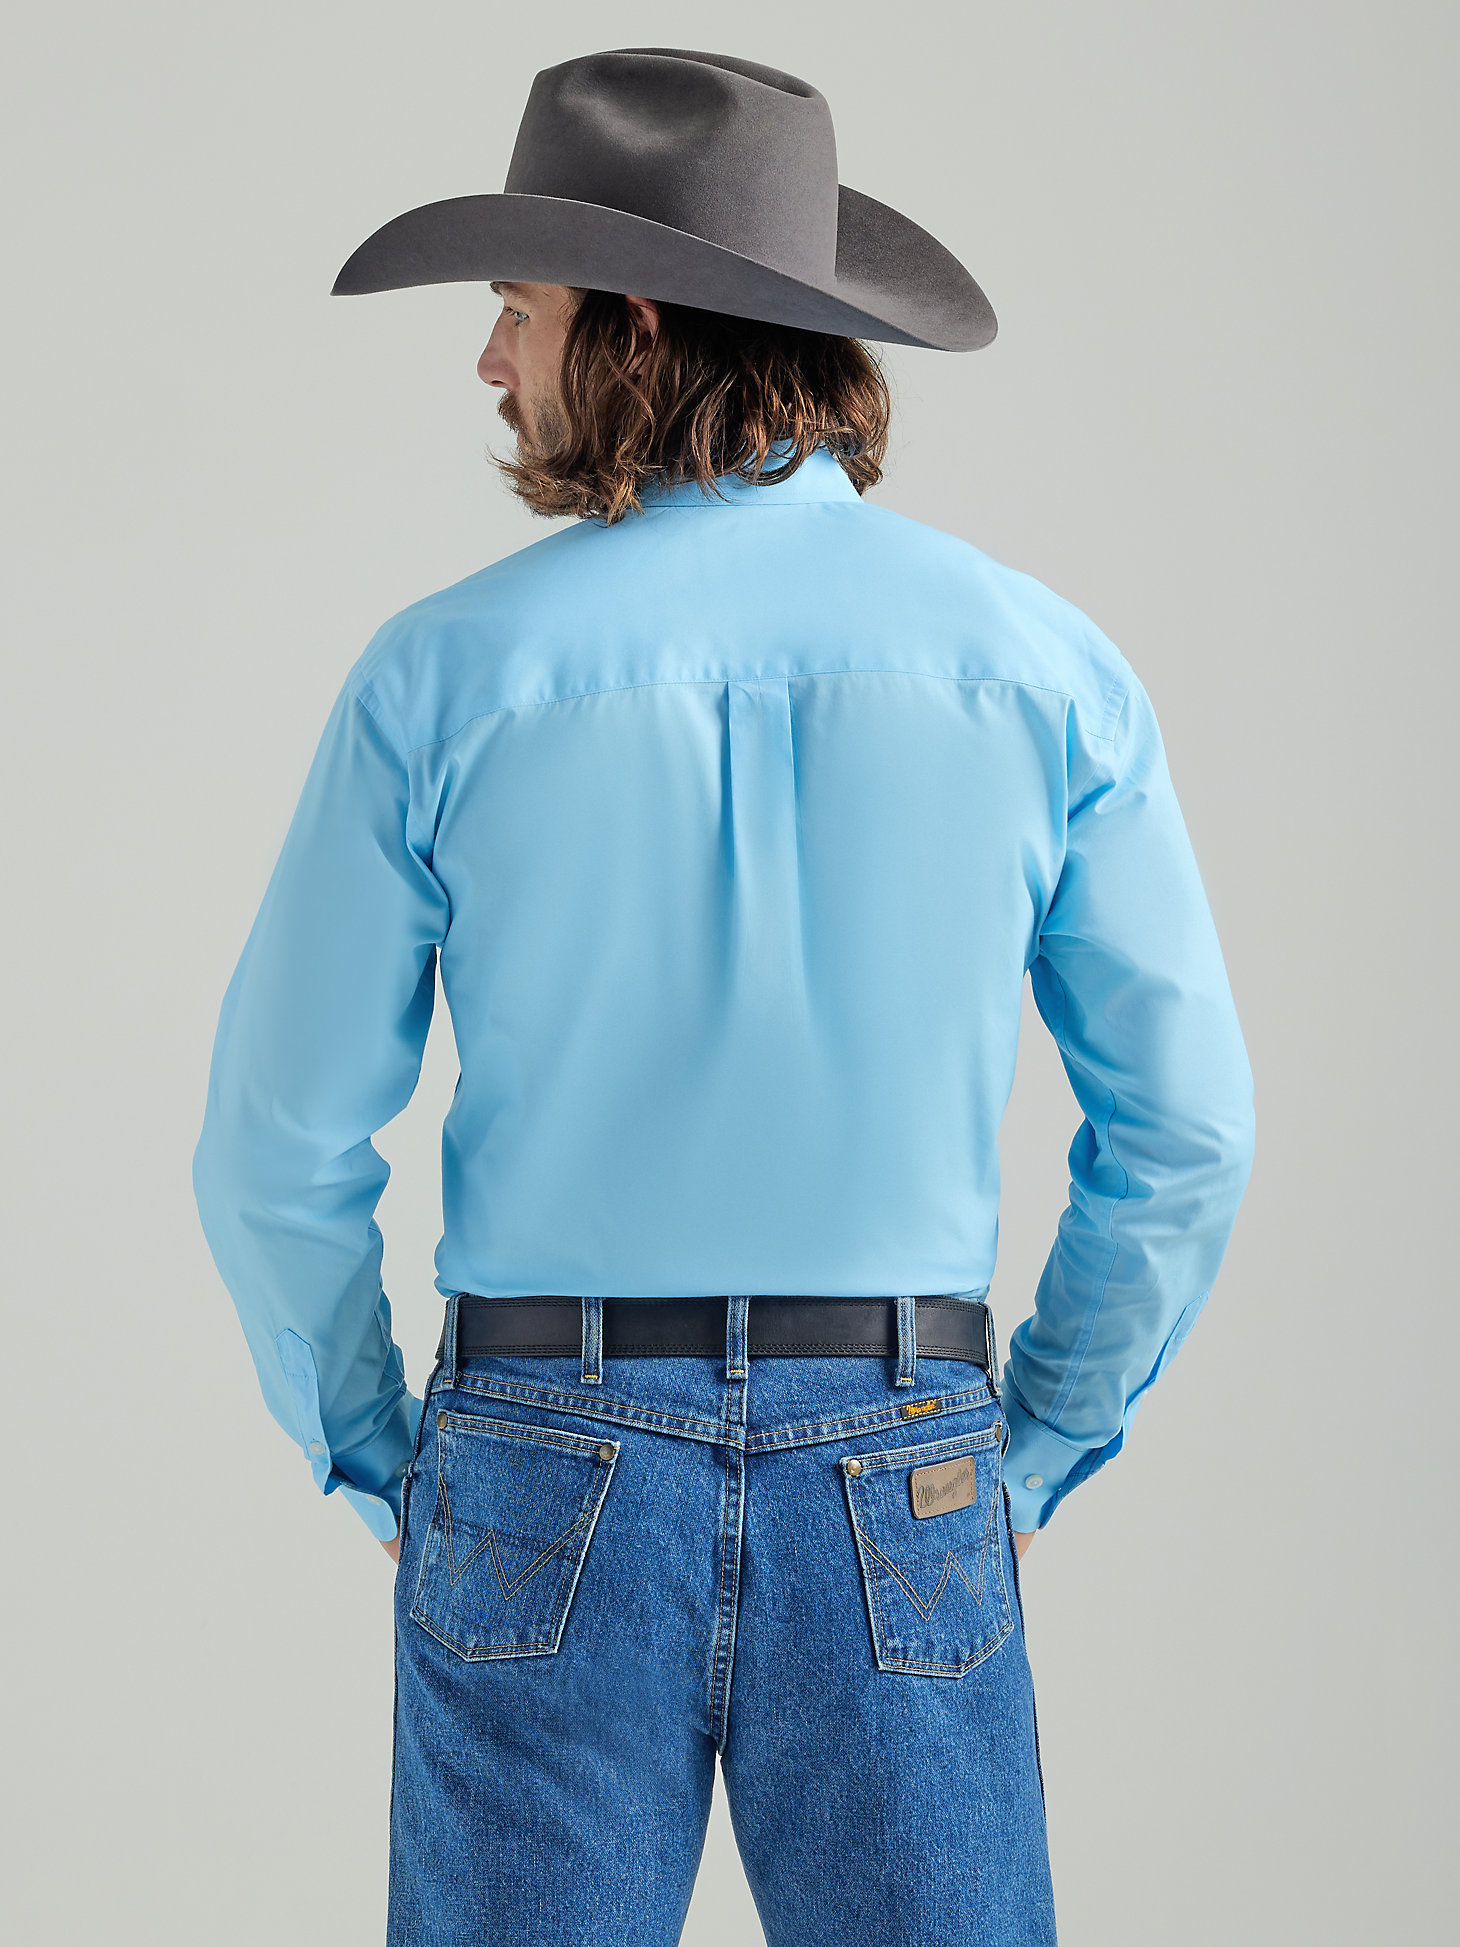 Men's George Strait® Long Sleeve One Pocket Button Down Solid Shirt in Baby Blue alternative view 1